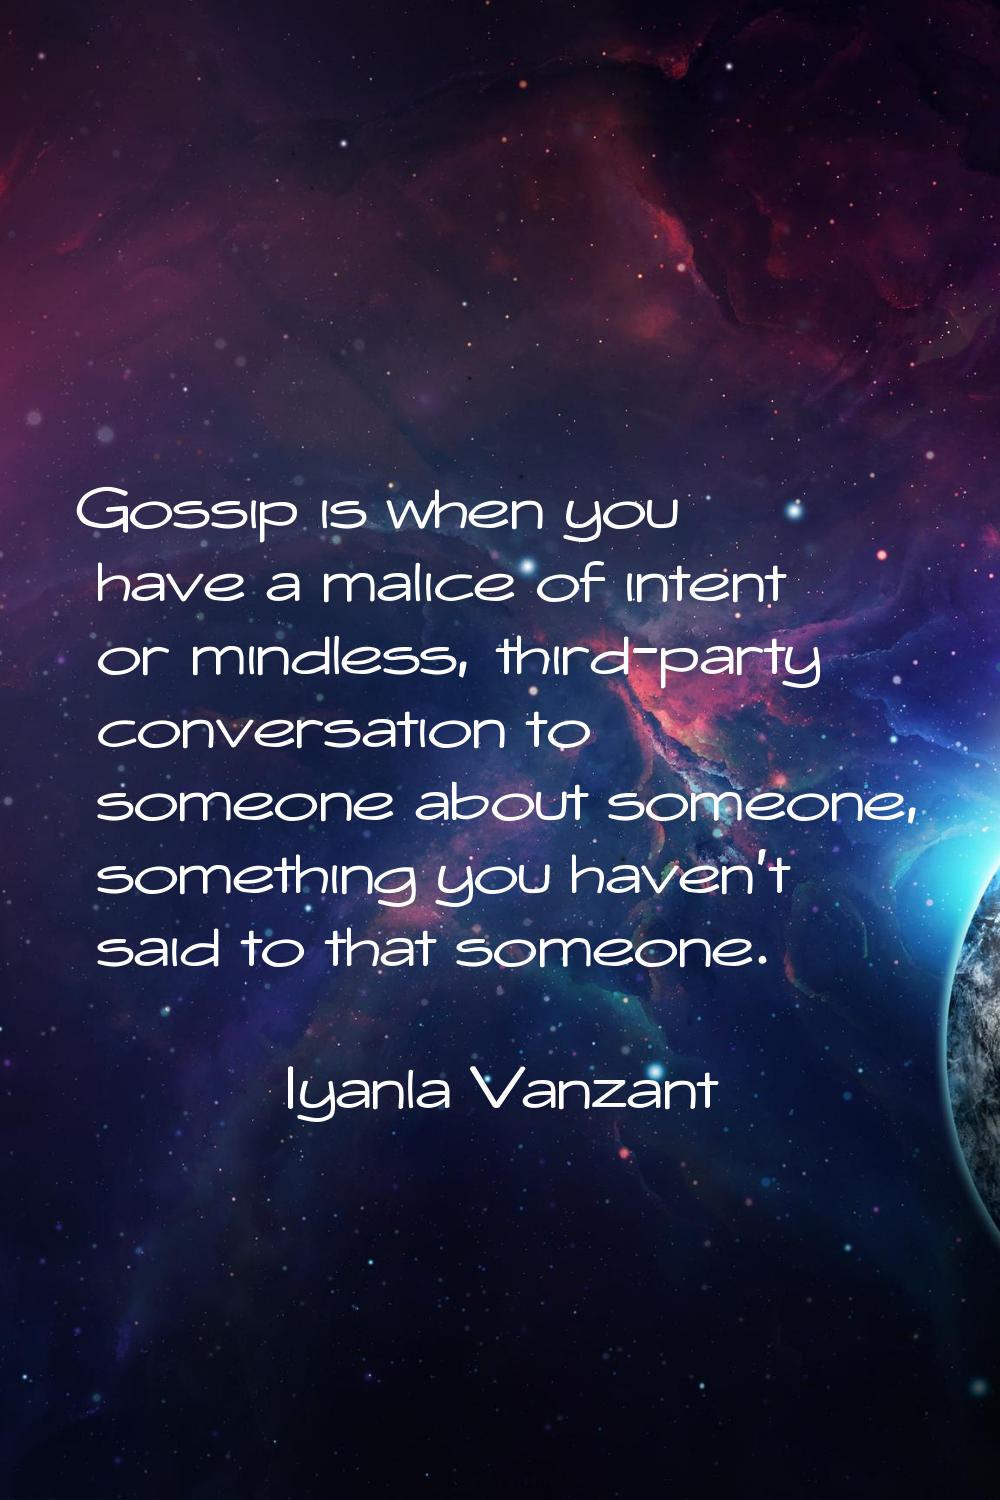 Gossip is when you have a malice of intent or mindless, third-party conversation to someone about s